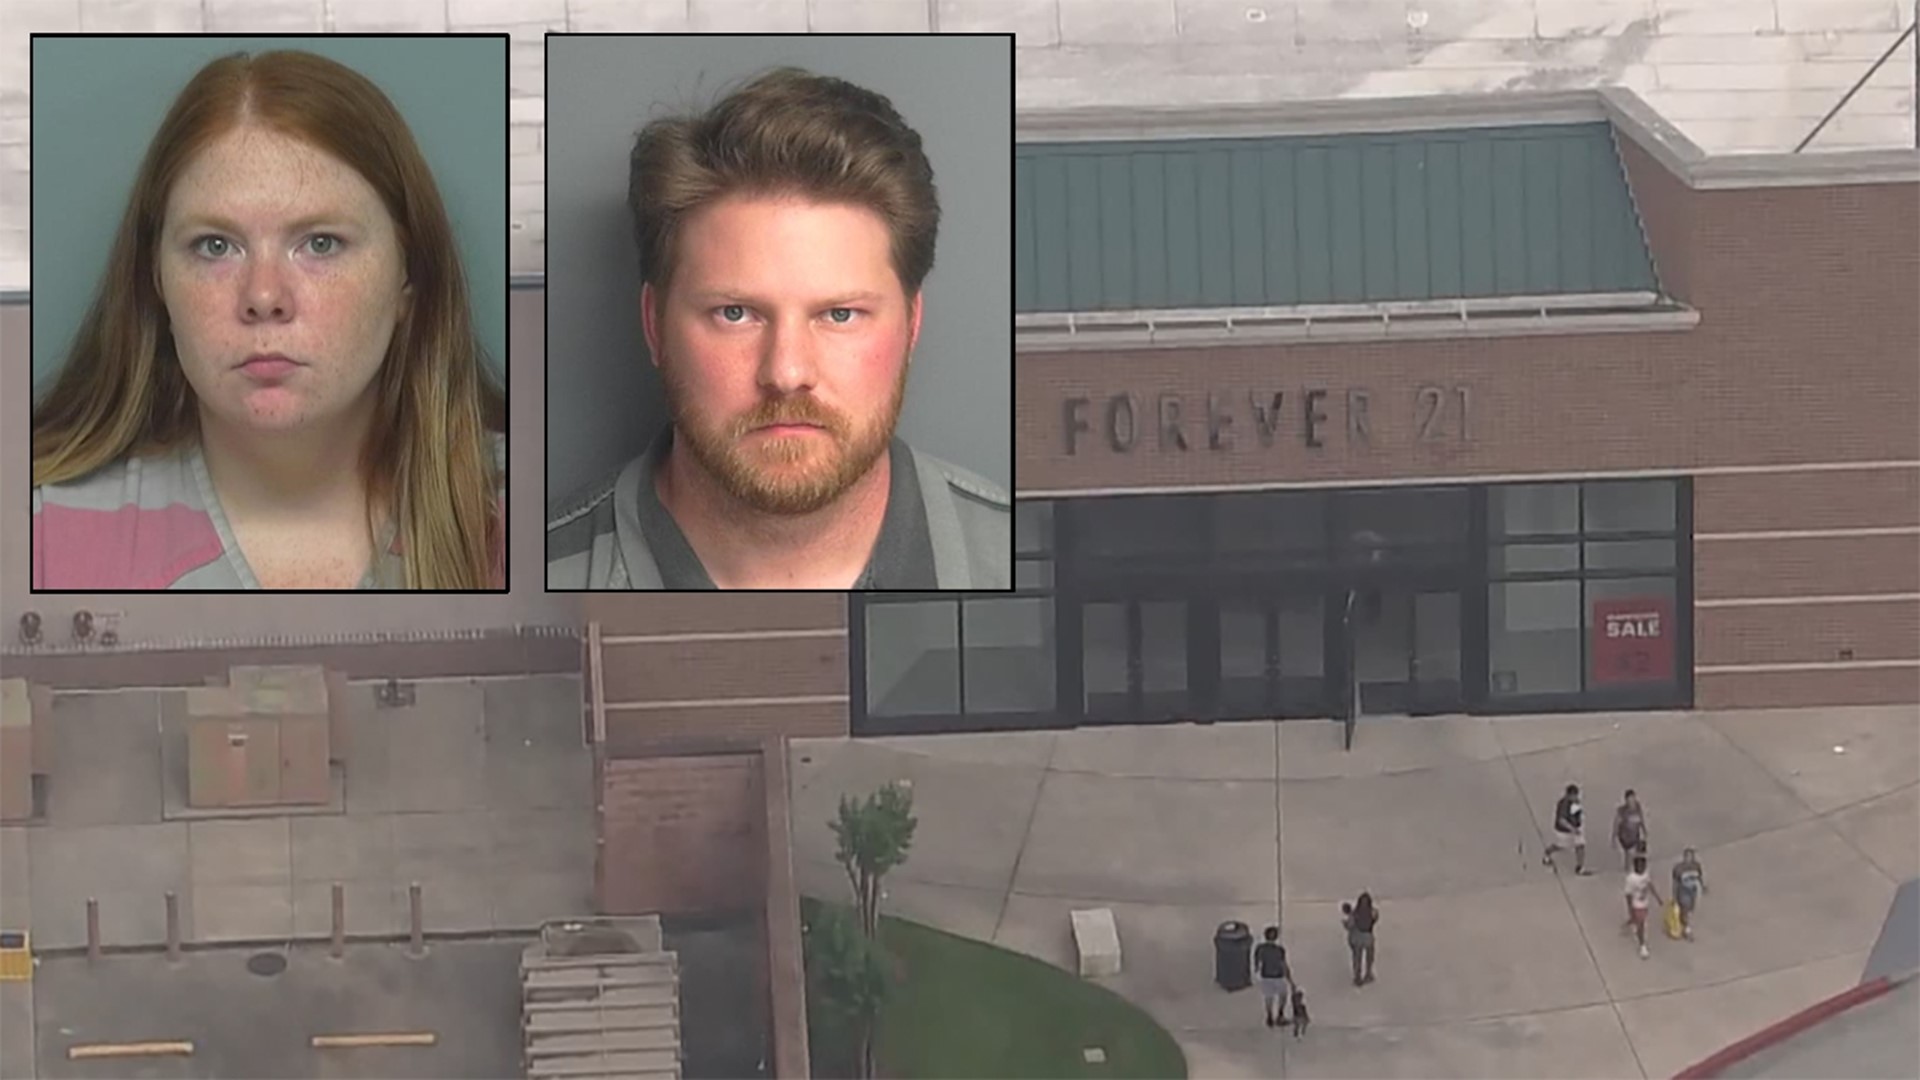 Taylor Roy and his wife Tasha Roy are both charged with felony invasive visual recording. Taylor Roy also coaches kids in tennis, detectives said.